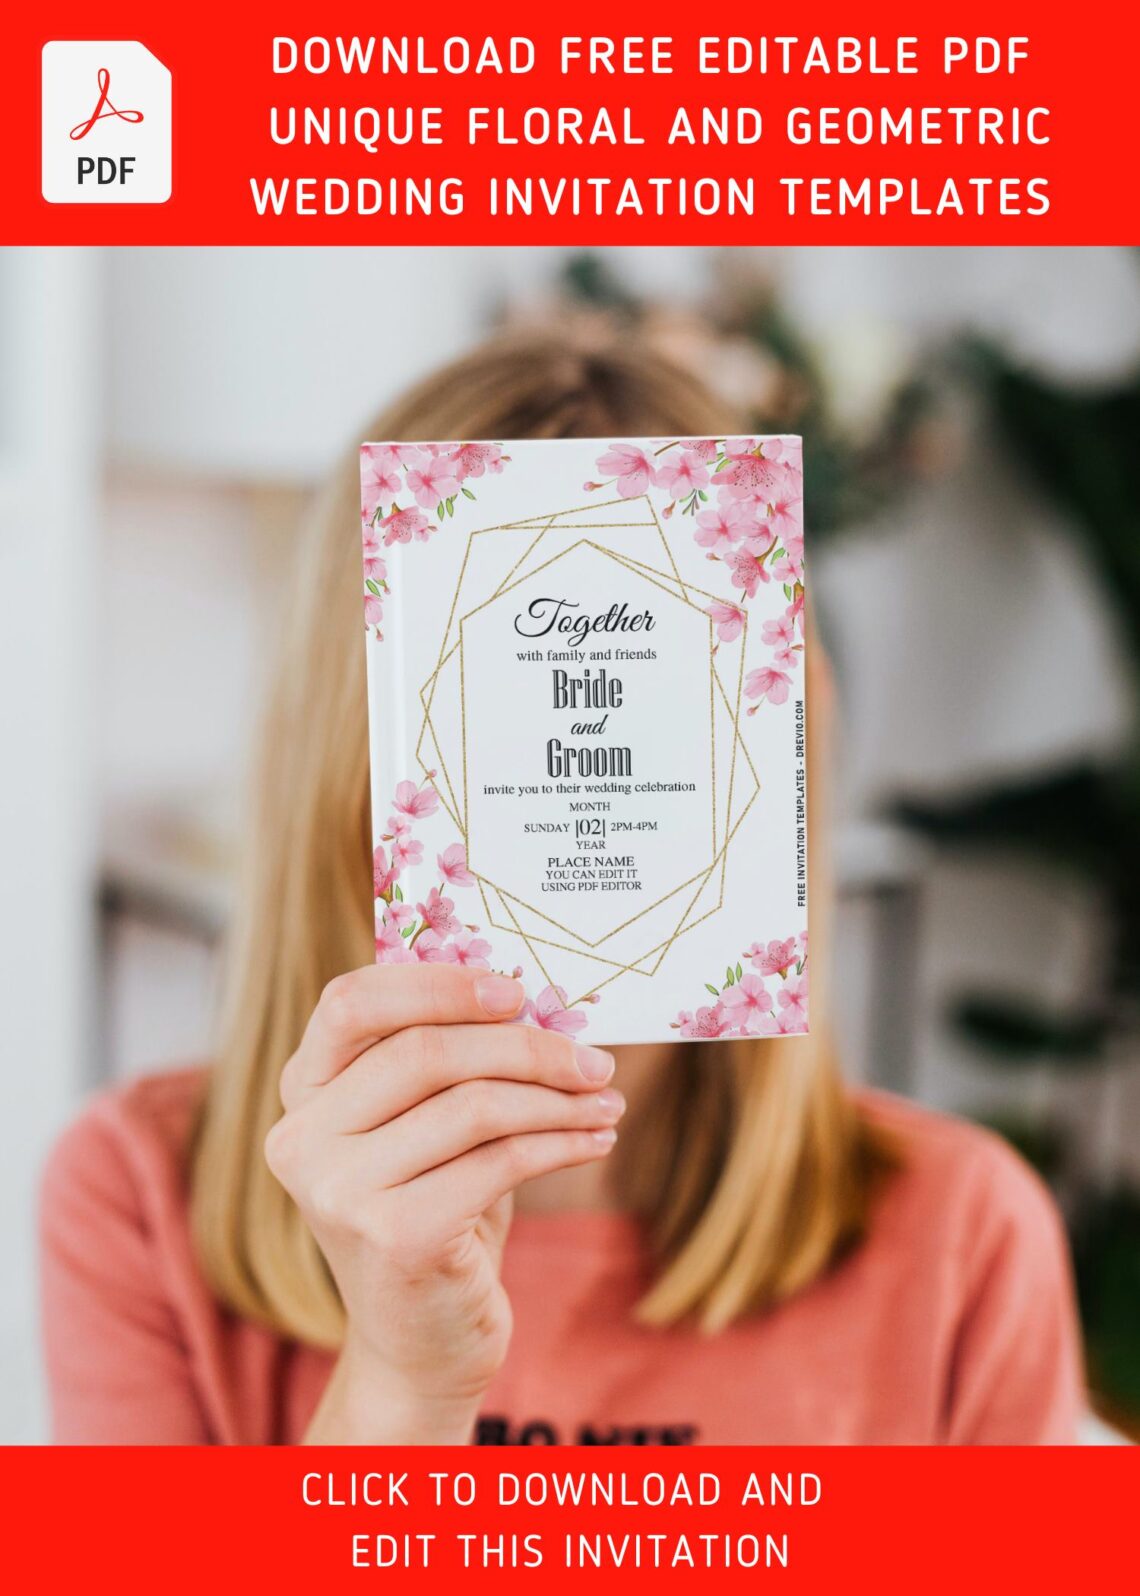 (Free Editable PDF) Unique Floral And Geometric Wedding Invitation Templates with